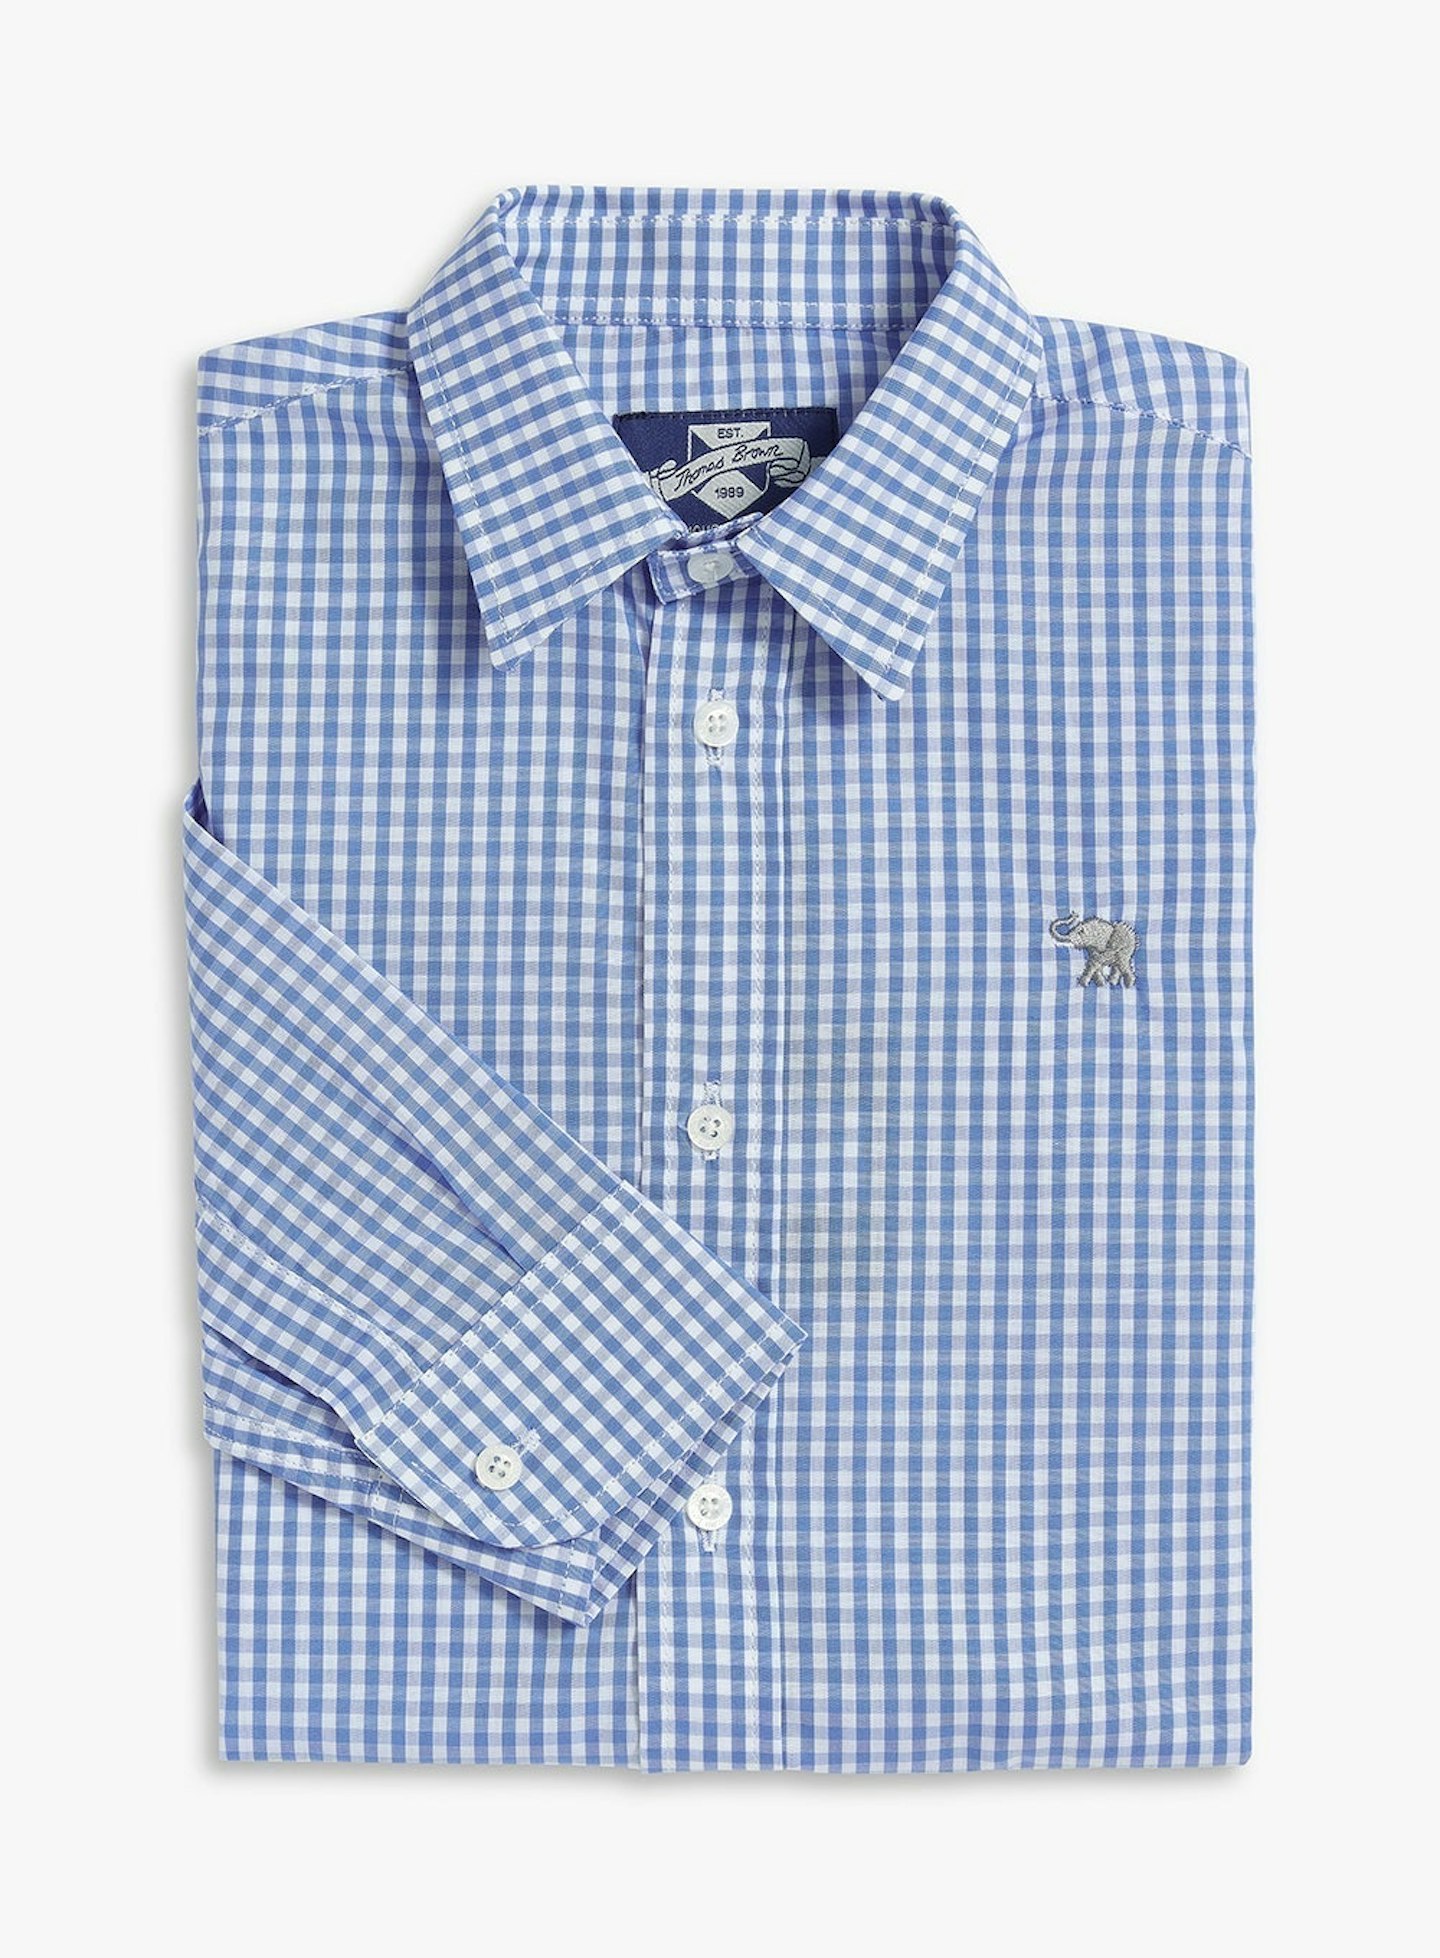 Trotters, Thomas Brown Blue Gingham Oliver Shirt, £45